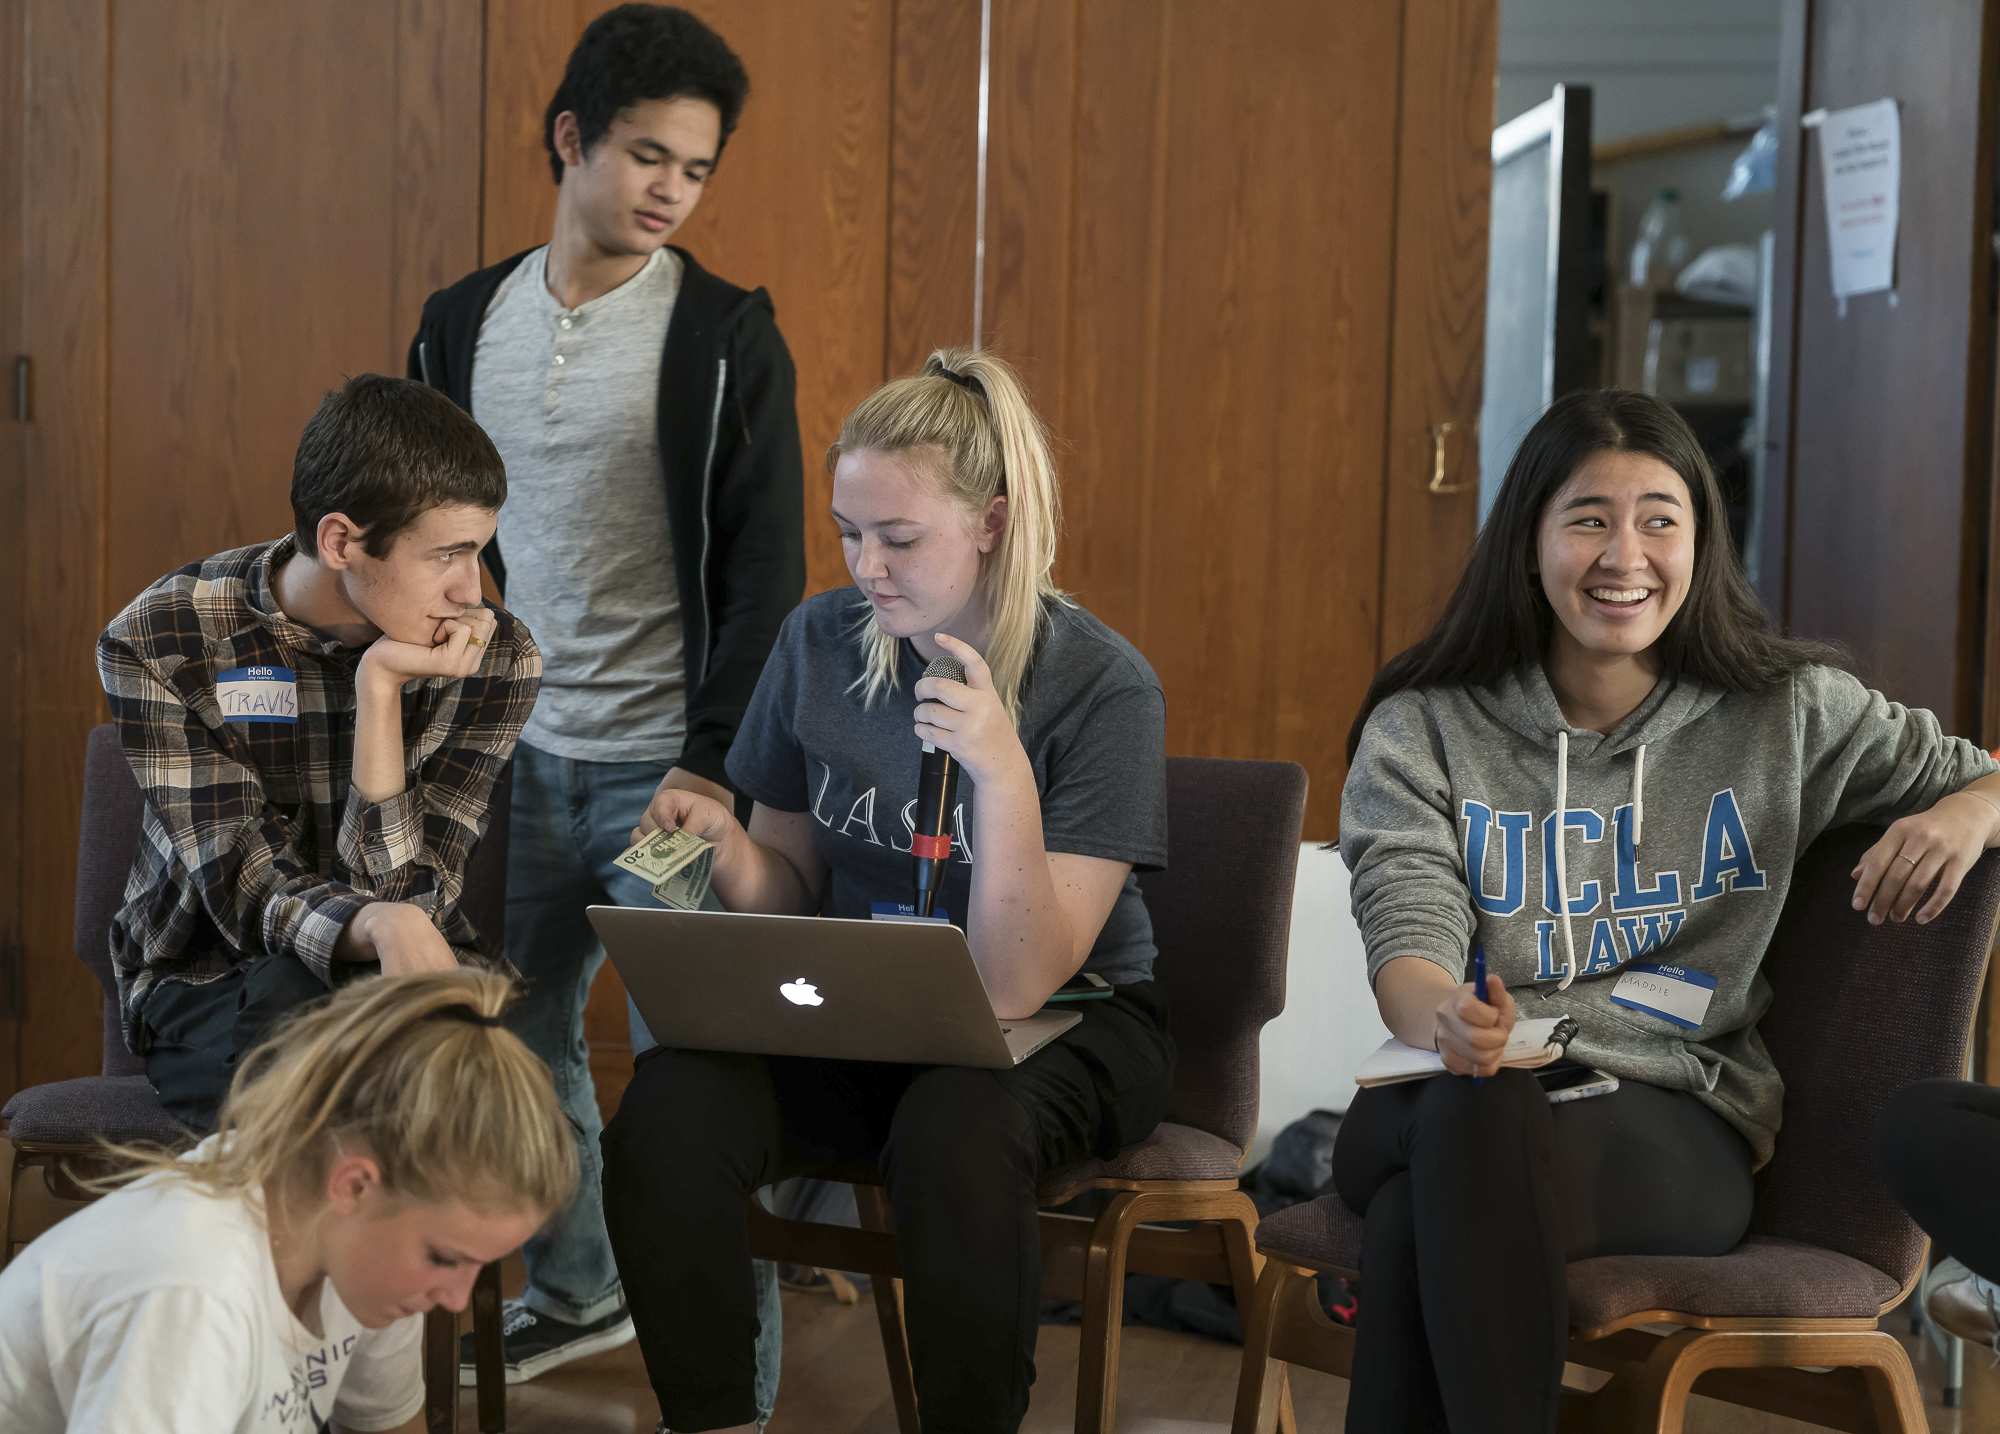  Students from several Los Angeles area high schools met in Santa Monica, California on Tuesday, April 17, 2018 to discuss a planned walkout and protest rally at Santa Monica City Hall on Friday, April 20. Clockwise from lower left: Siri Storstein, T